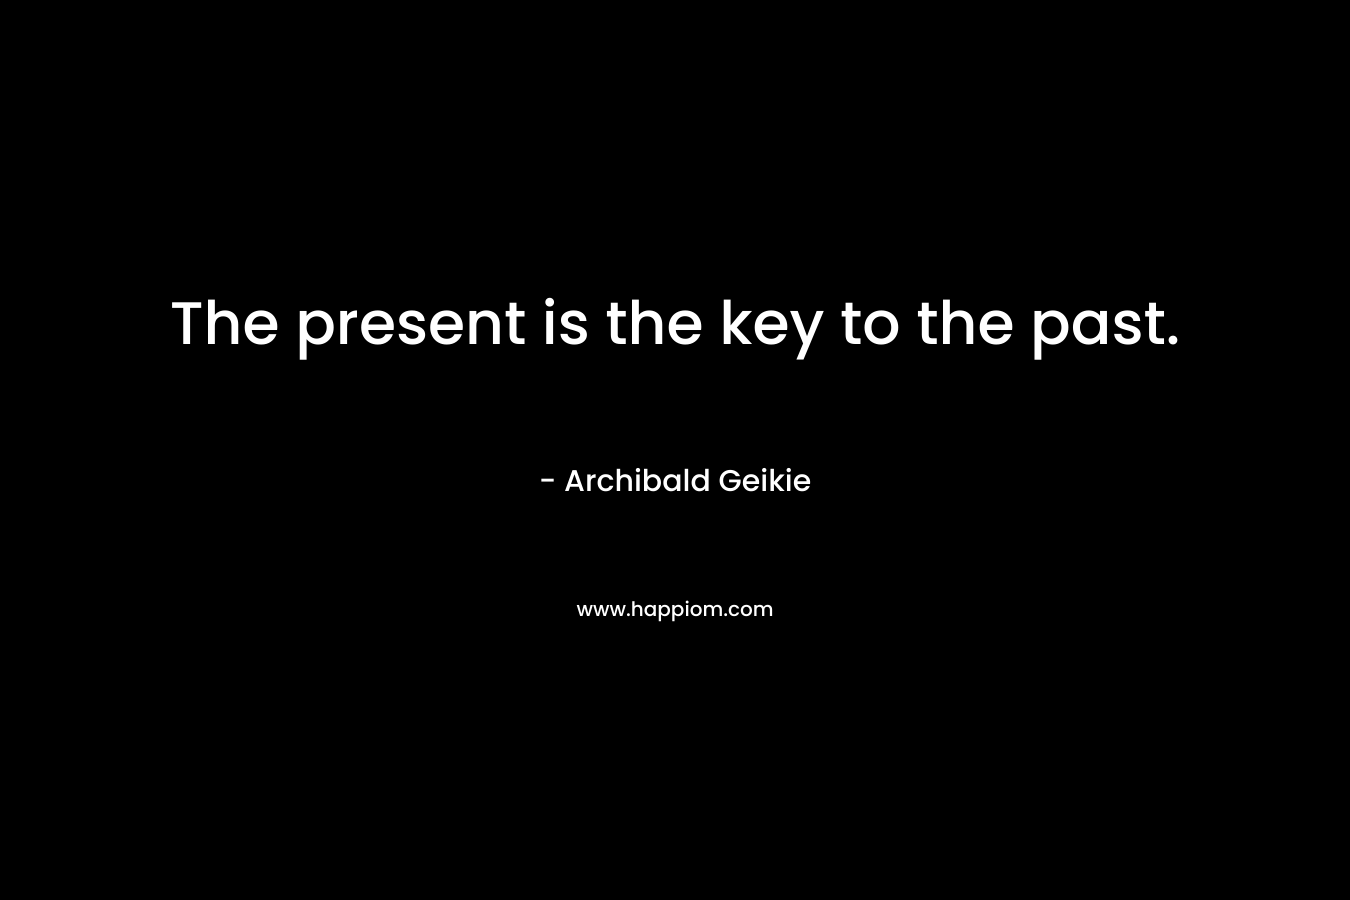 The present is the key to the past.